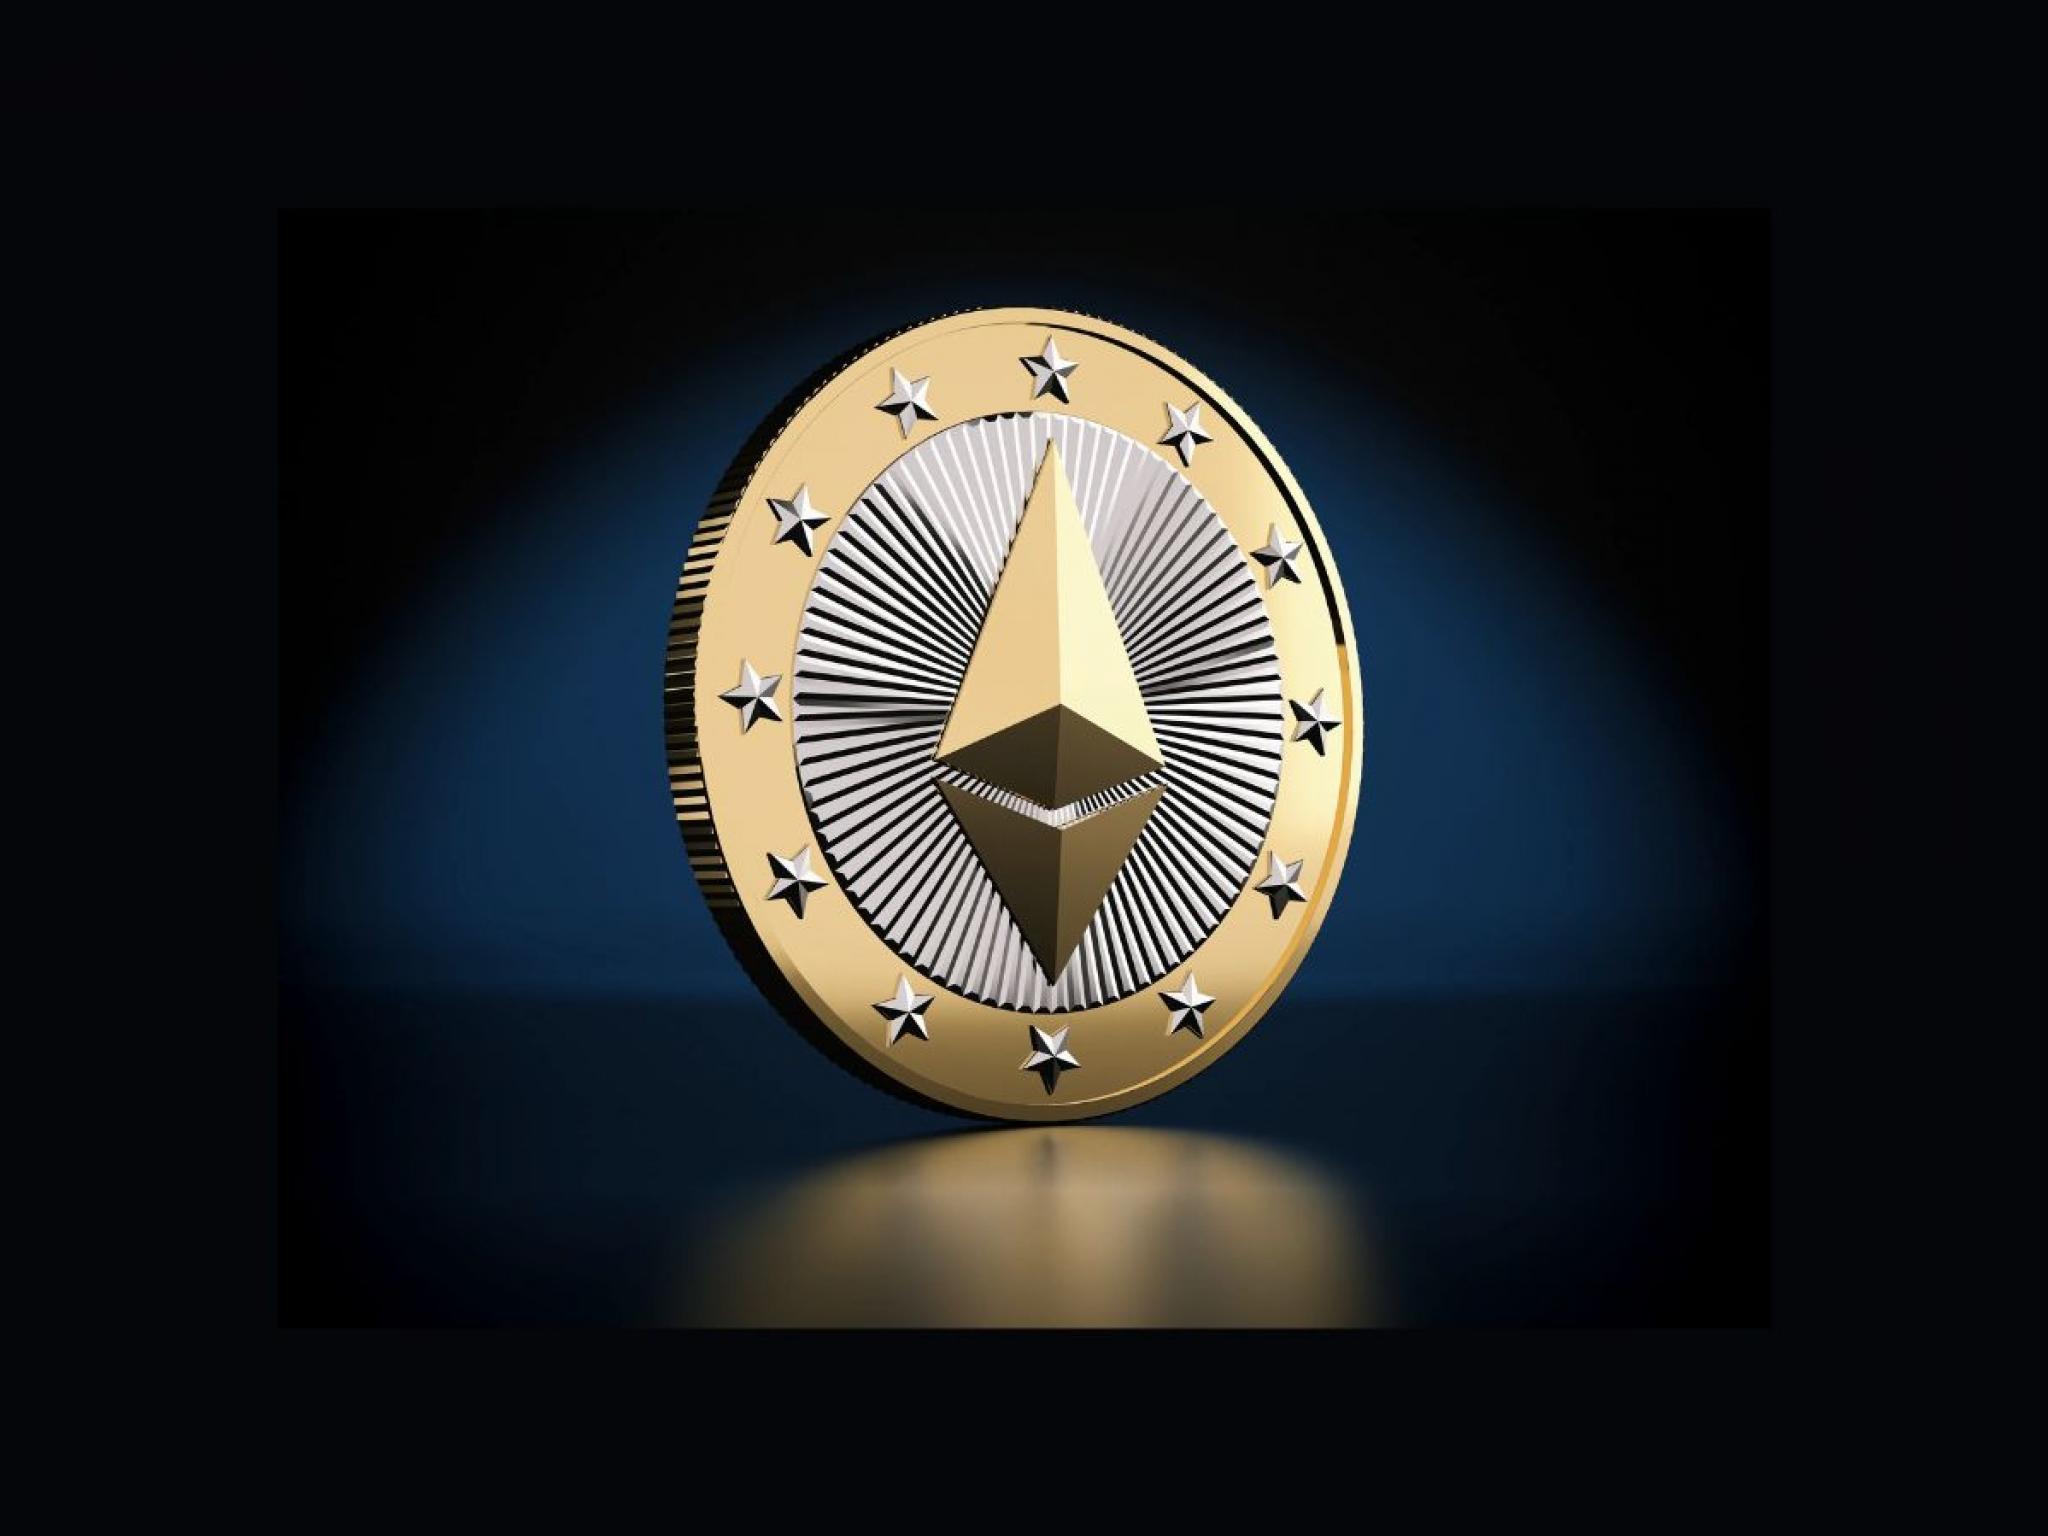  ethereum-trades-above-1800-tron-becomes-top-gainer 